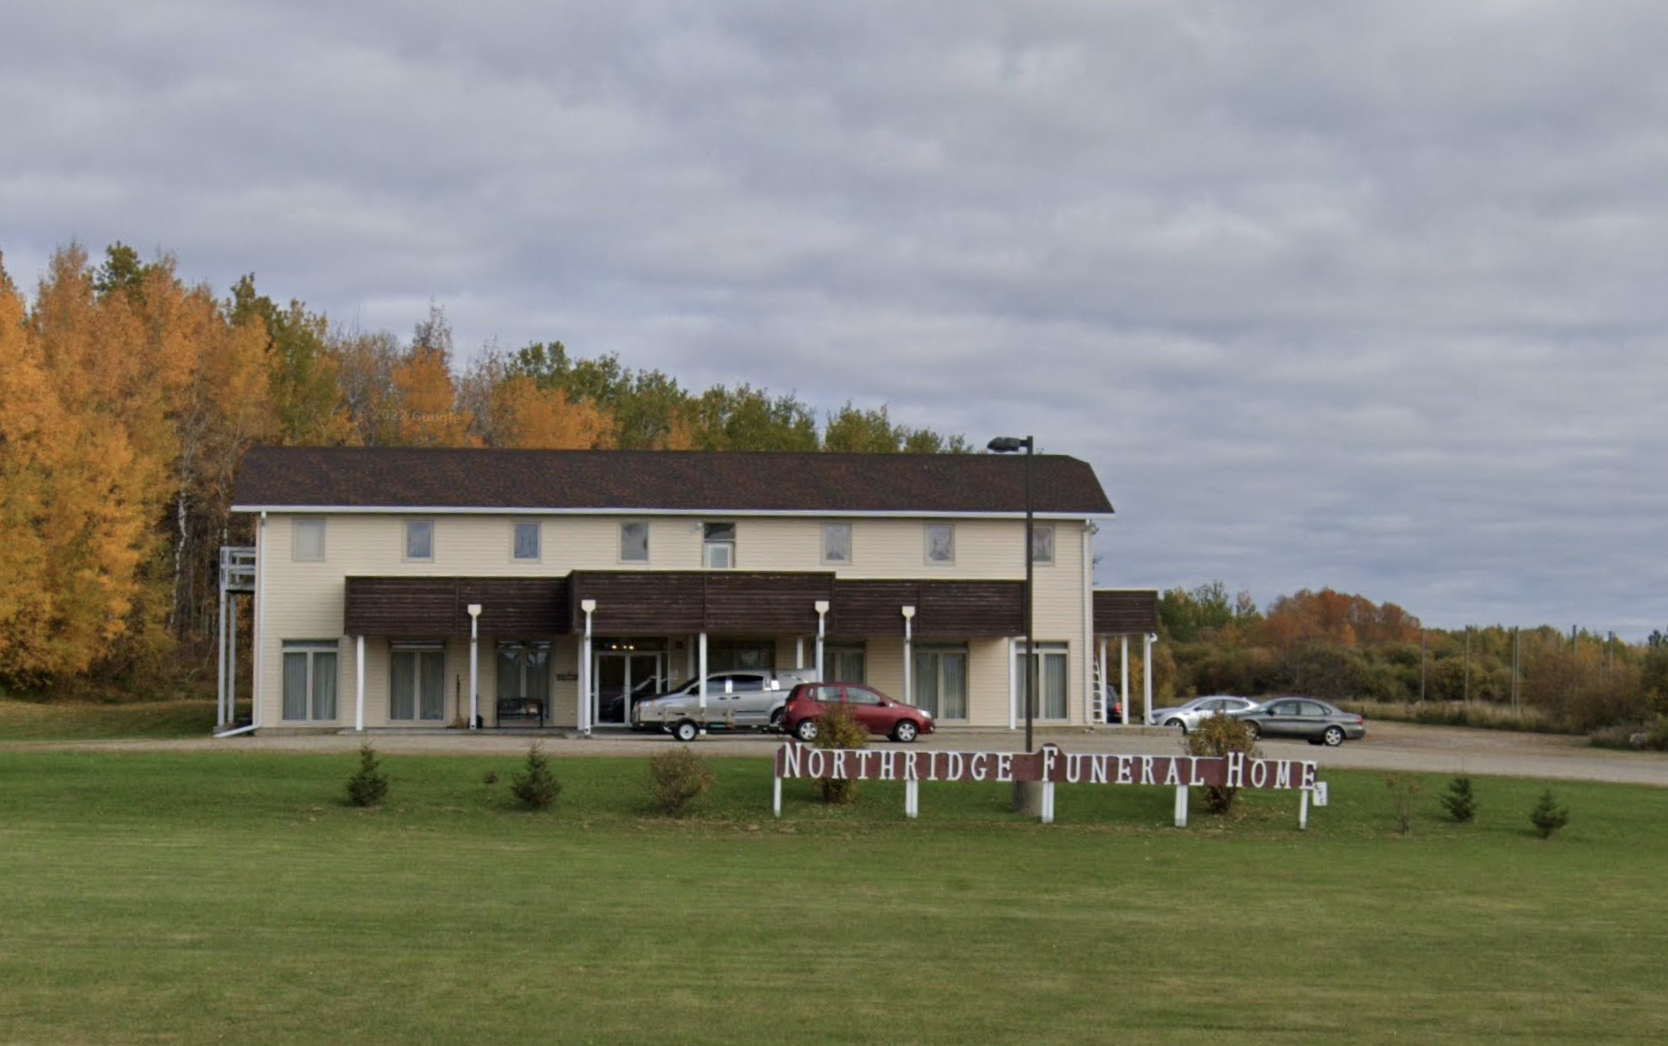 Only a handful of funeral directors remain in northwestern Ontario, raising concerns on future losses and burnout